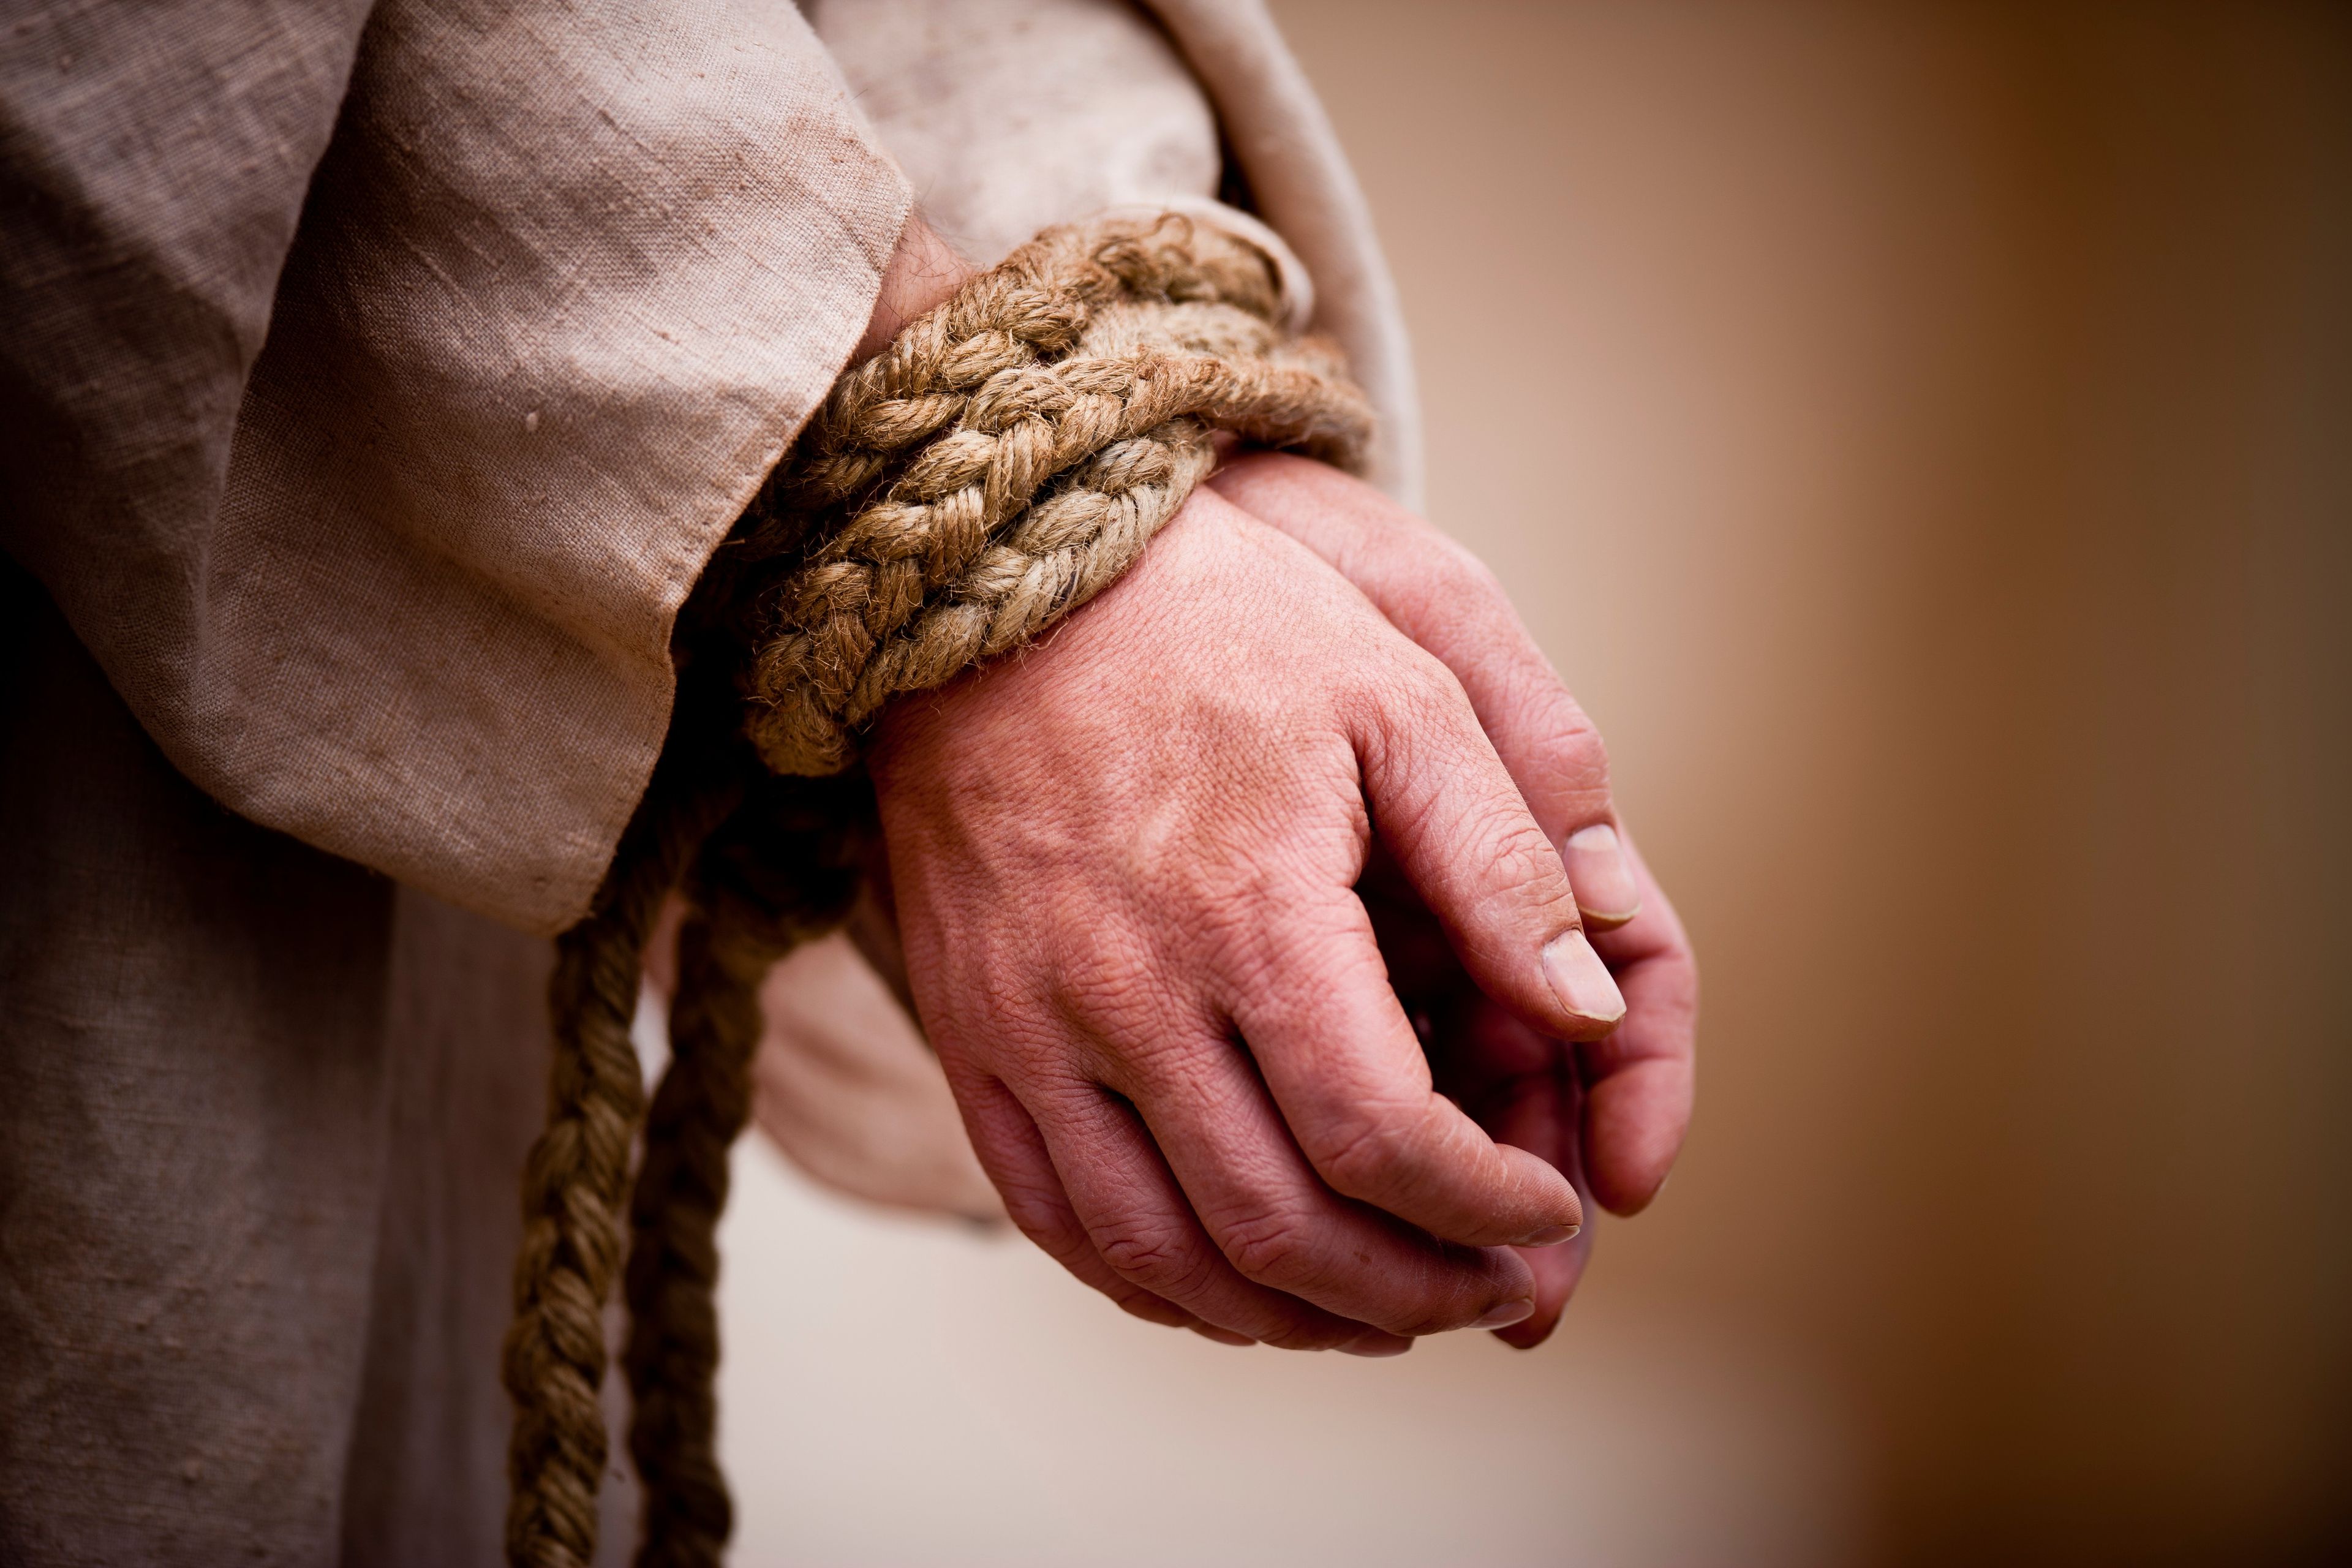 Christ’s hands bound with a strong rope.